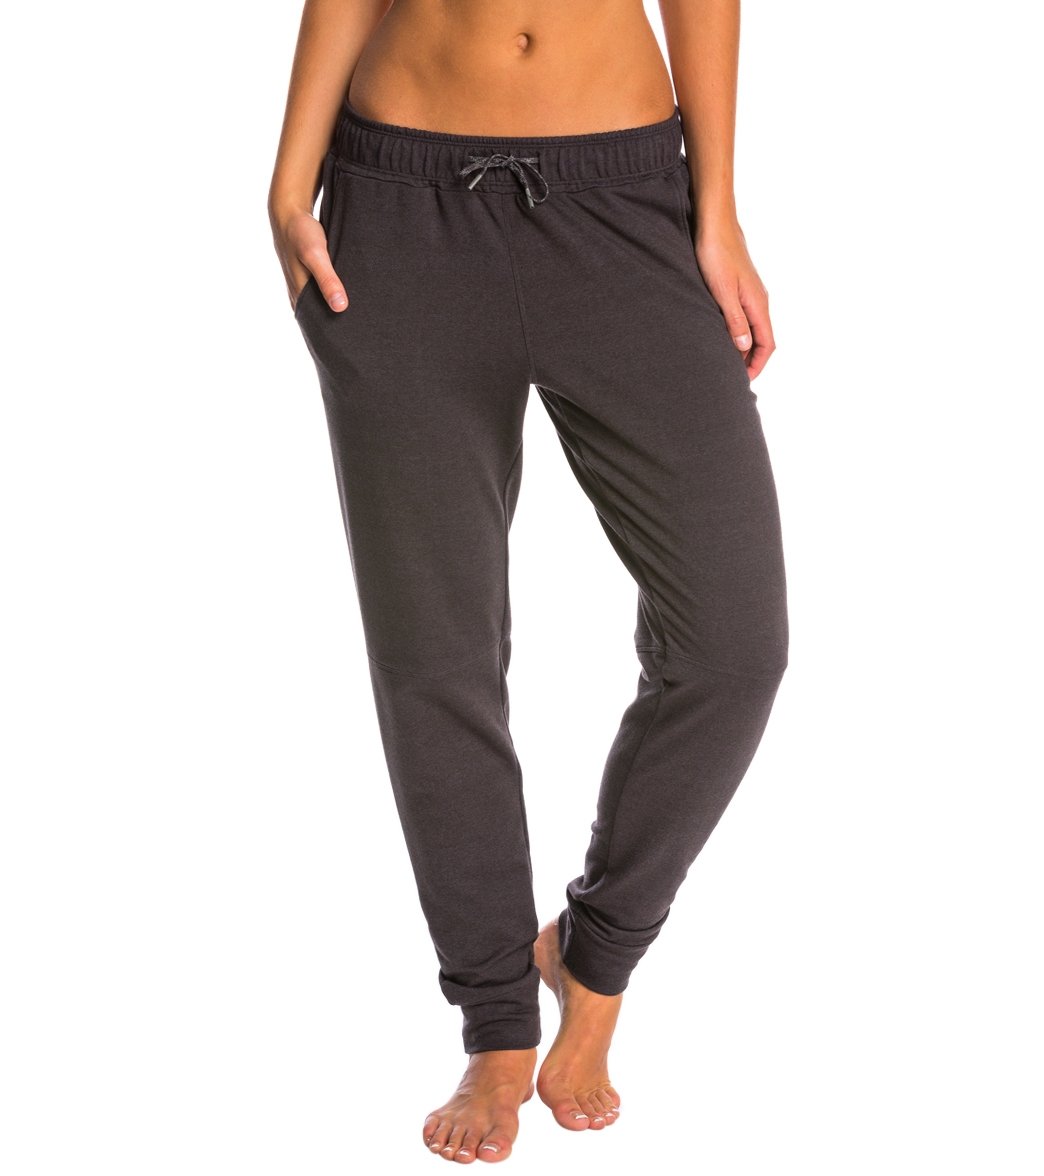 Poging Ounce religie Speedo Female Jogger Pant at SwimOutlet.com